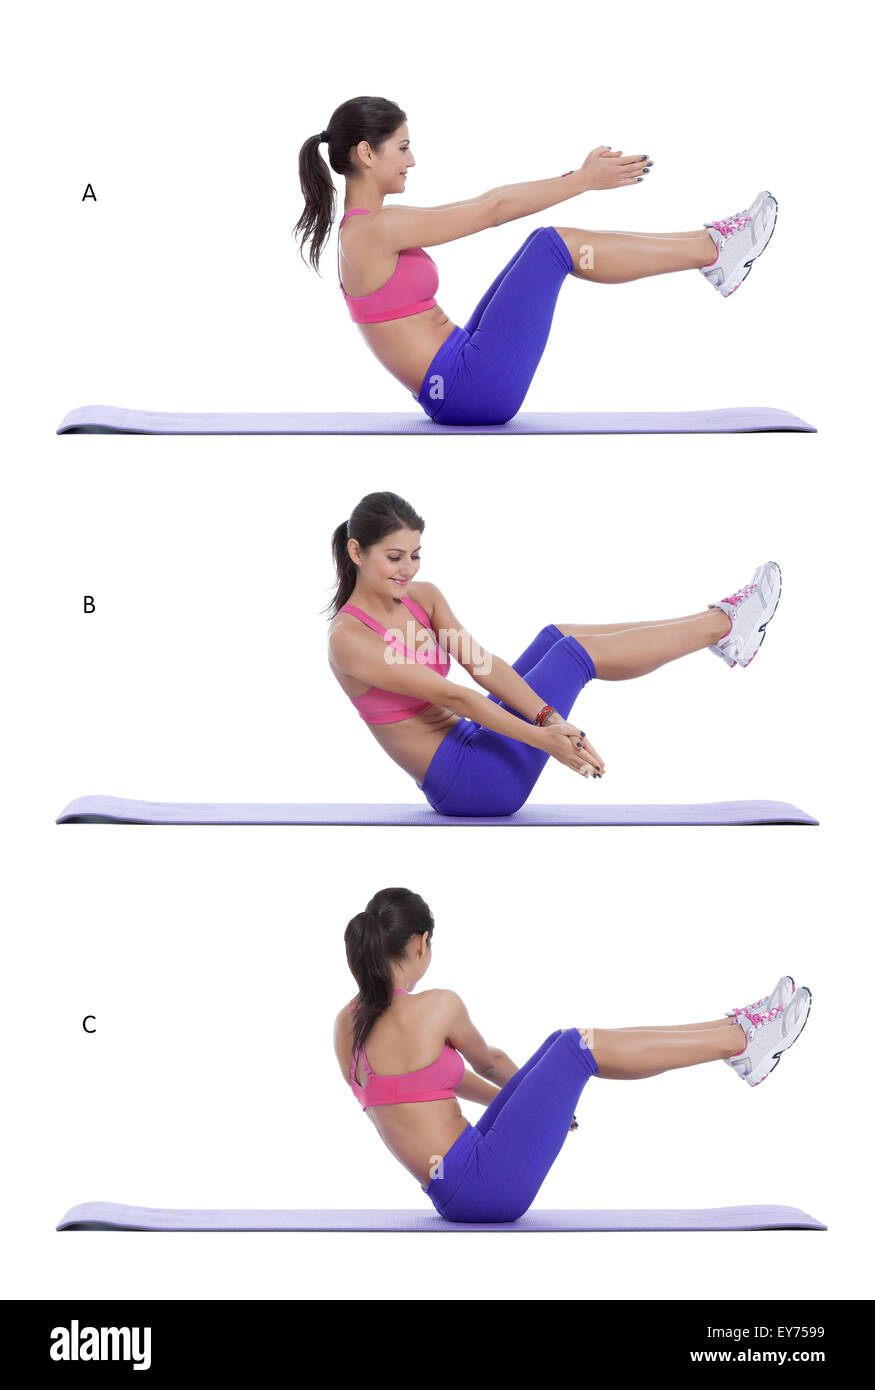 Step by step instructions for abs: Lie on the floor with your lower back pressed against the floor and knees bent in the air and Stock Photo